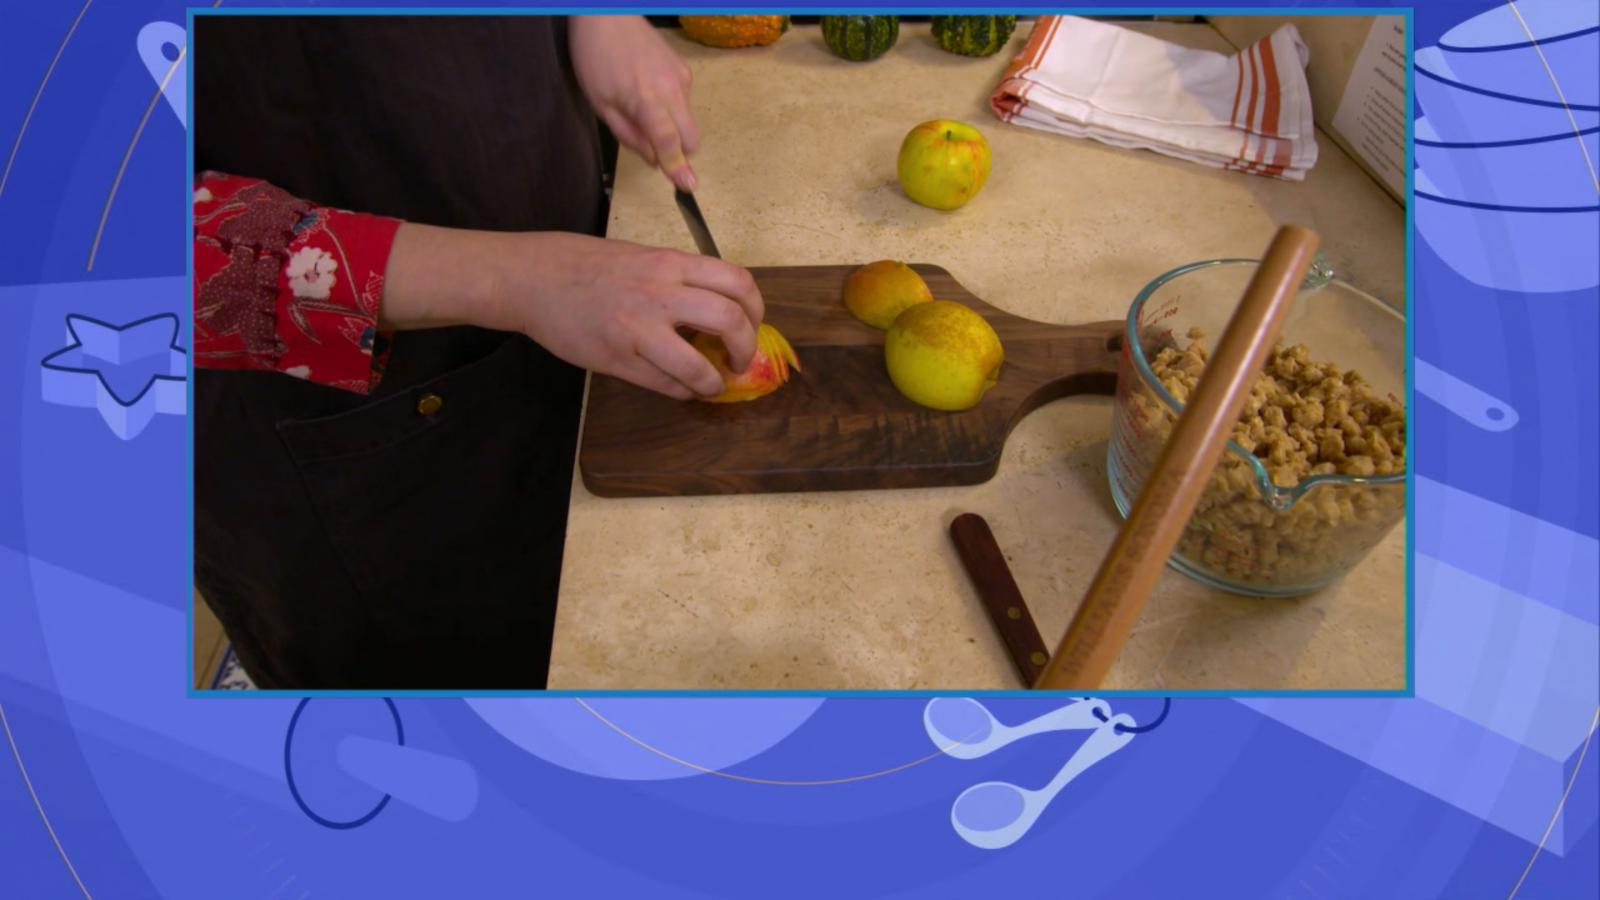 PHOTO: Claire Saffitz shows how to slice an apple using the tip of her knife so it doesn't stick while cutting.